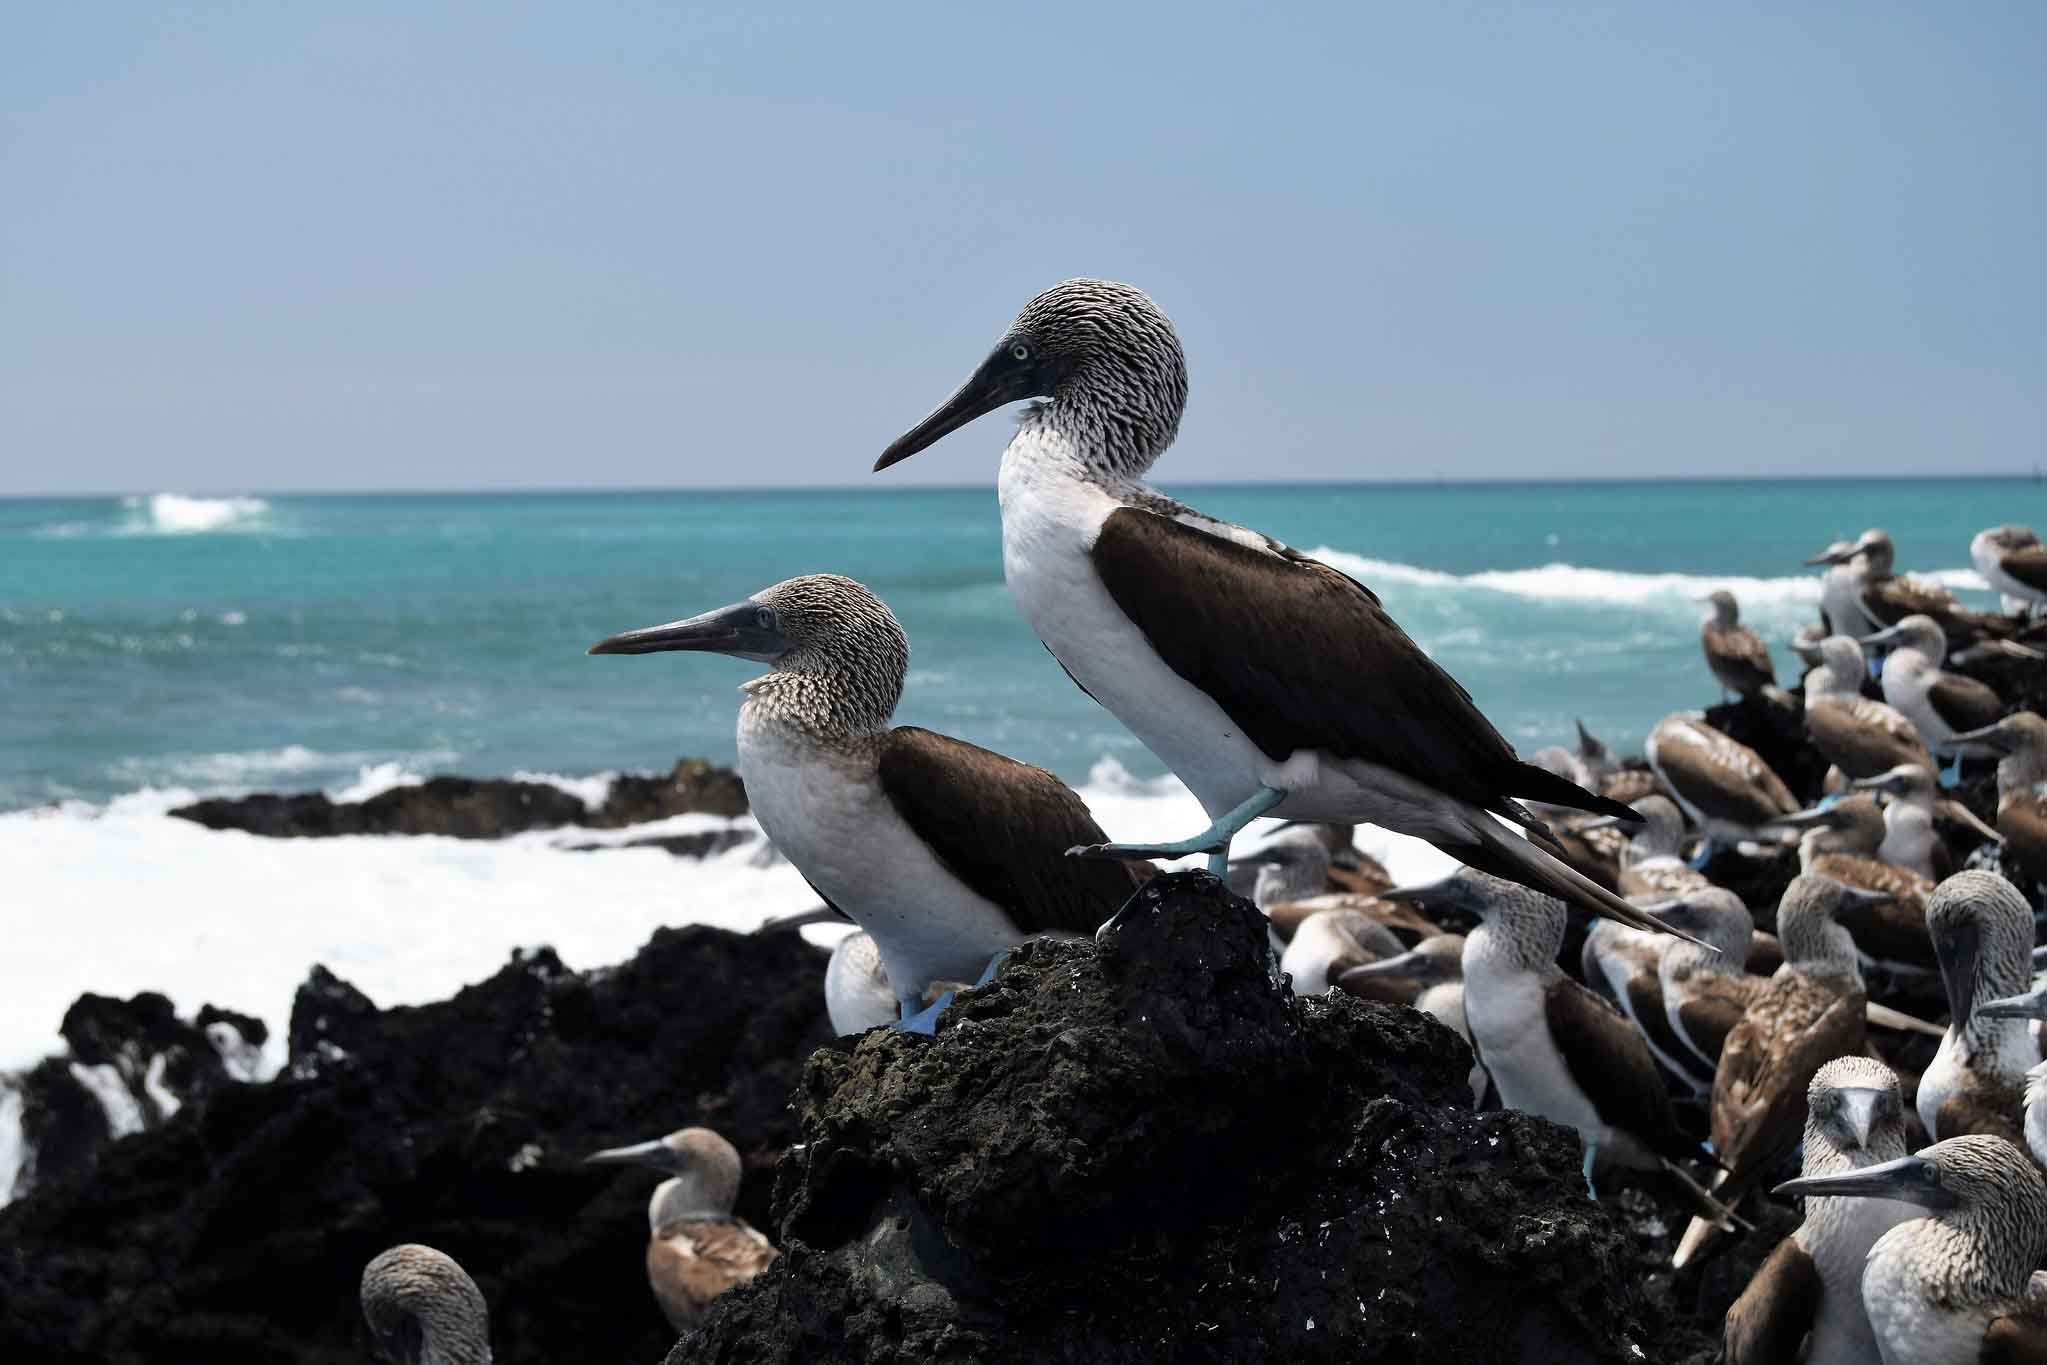 Blue footed boobies | Galapagos